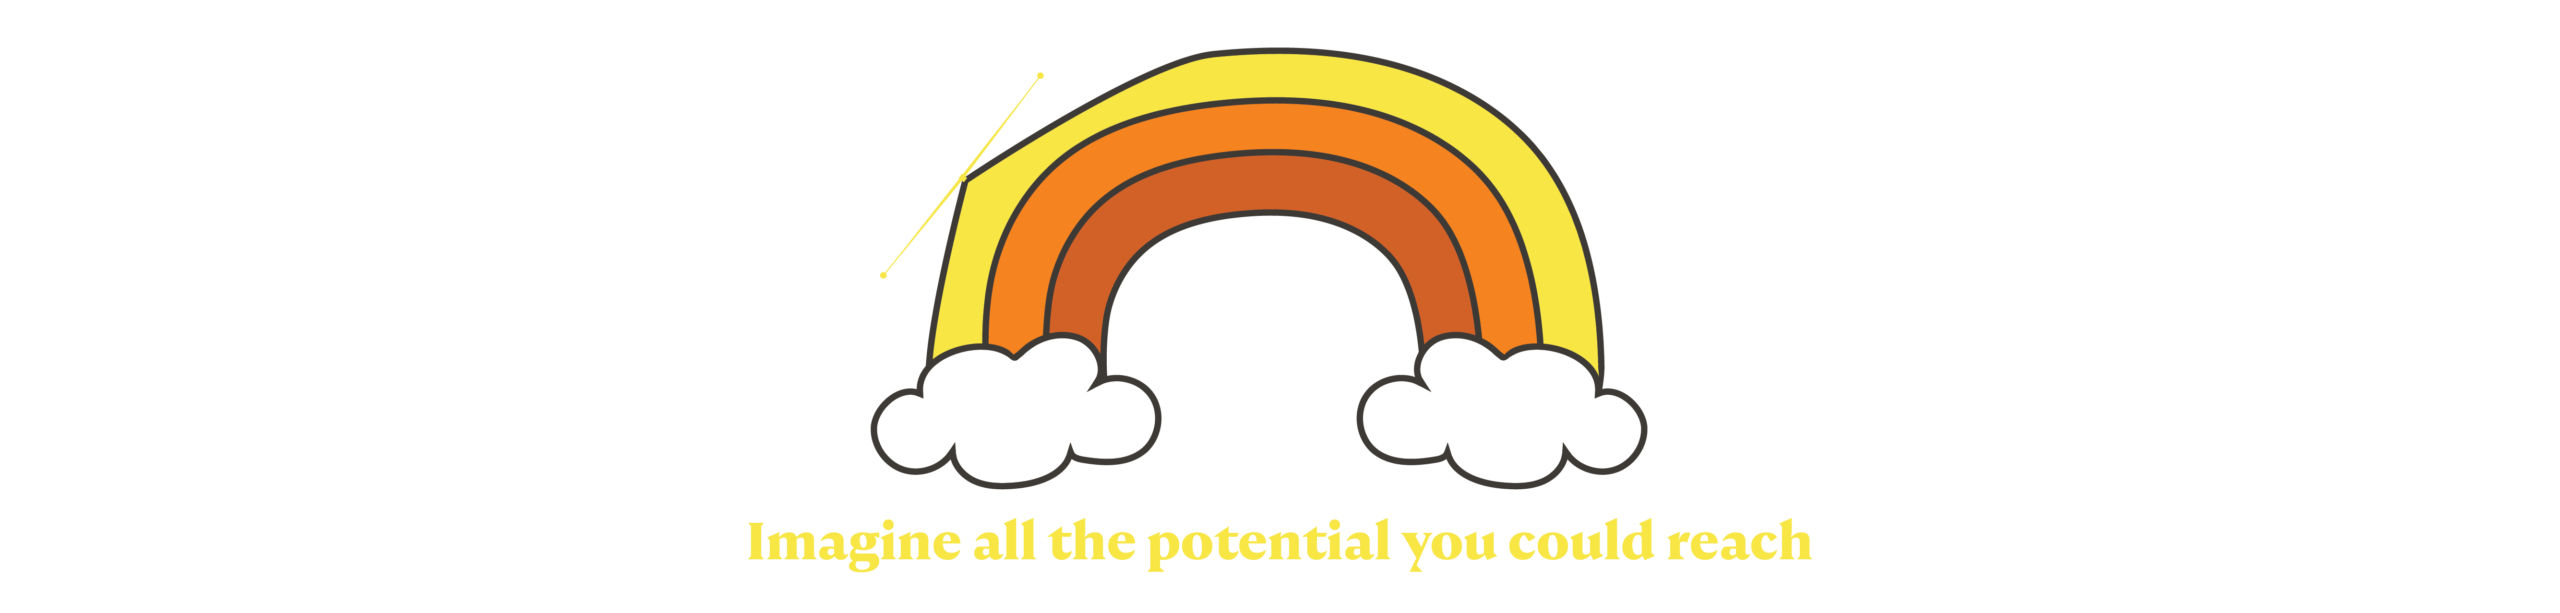 Services | "Imagine All The Potential You Could Reach" | Custom Illustration of Rainbow with Anchor Point